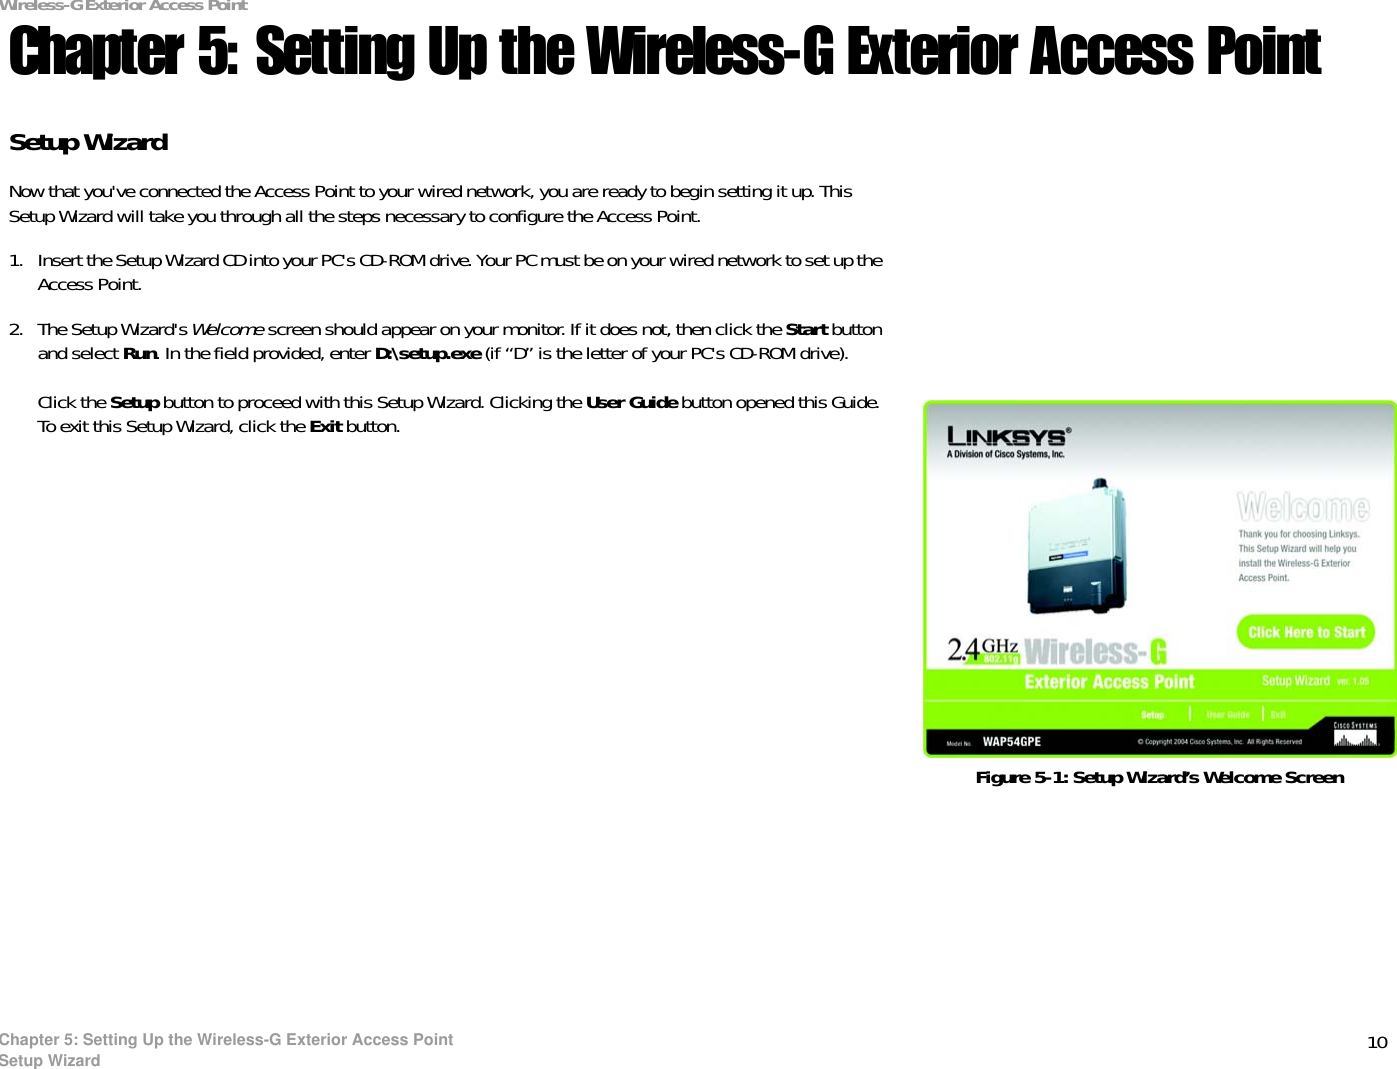 10Chapter 5: Setting Up the Wireless-G Exterior Access PointSetup WizardWireless-G Exterior Access PointChapter 5: Setting Up the Wireless-G Exterior Access PointSetup WizardNow that you&apos;ve connected the Access Point to your wired network, you are ready to begin setting it up. This Setup Wizard will take you through all the steps necessary to configure the Access Point.1. Insert the Setup Wizard CD into your PC&apos;s CD-ROM drive. Your PC must be on your wired network to set up the Access Point.2. The Setup Wizard&apos;s Welcome screen should appear on your monitor. If it does not, then click the Start button and select Run. In the field provided, enter D:\setup.exe (if “D” is the letter of your PC&apos;s CD-ROM drive). Click the Setup button to proceed with this Setup Wizard. Clicking the User Guide button opened this Guide. To exit this Setup Wizard, click the Exit button.Figure 5-1: Setup Wizard’s Welcome Screen